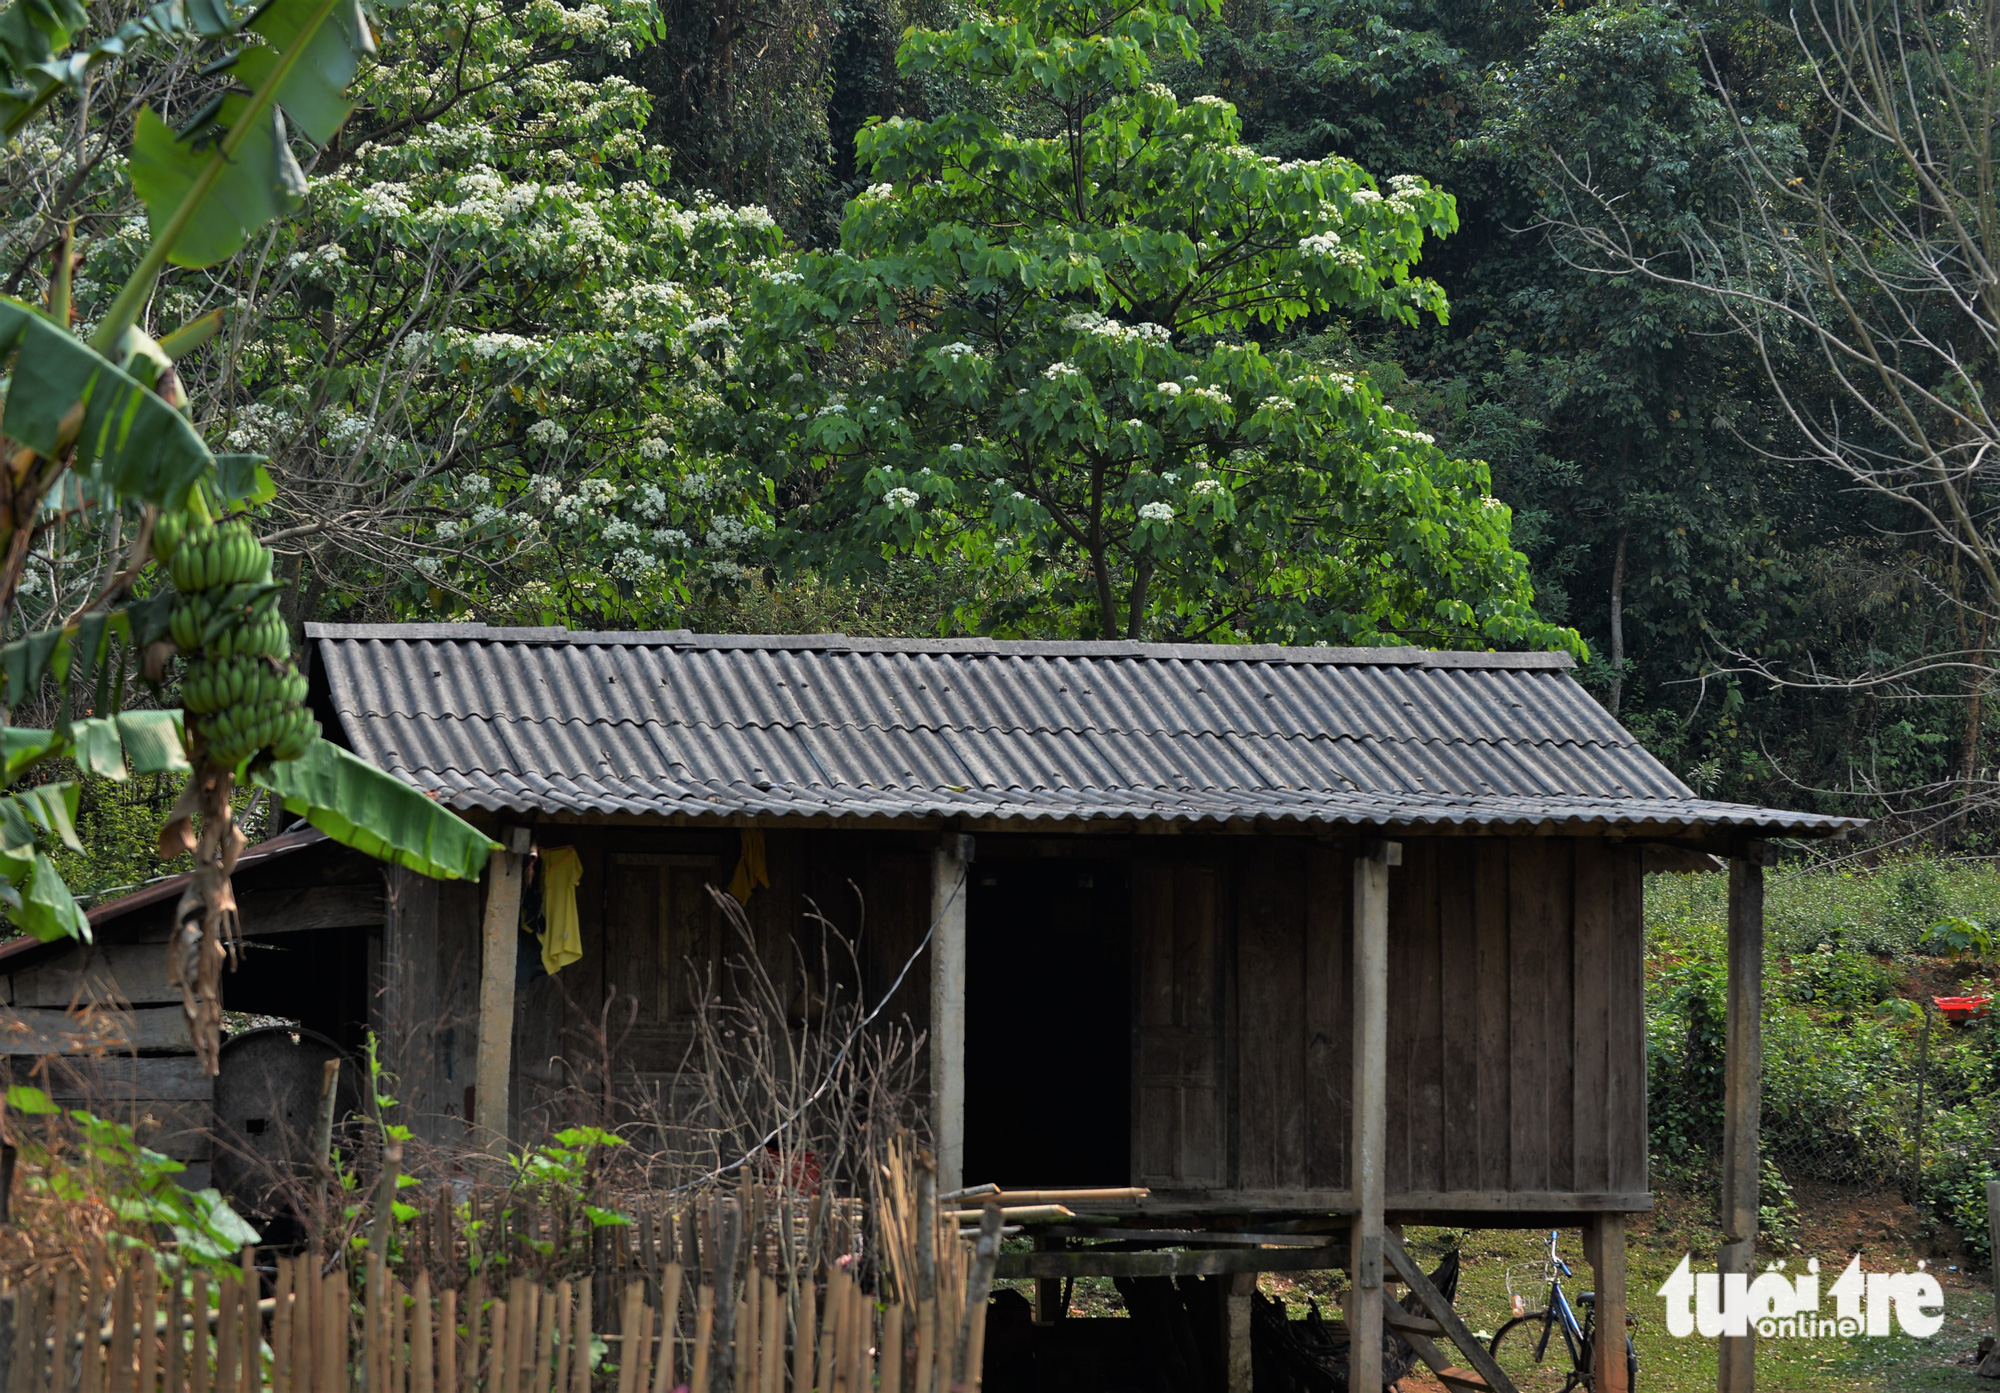 A local house nestles next to vernicia trees in full bloom. Photo: Tuoi Tre